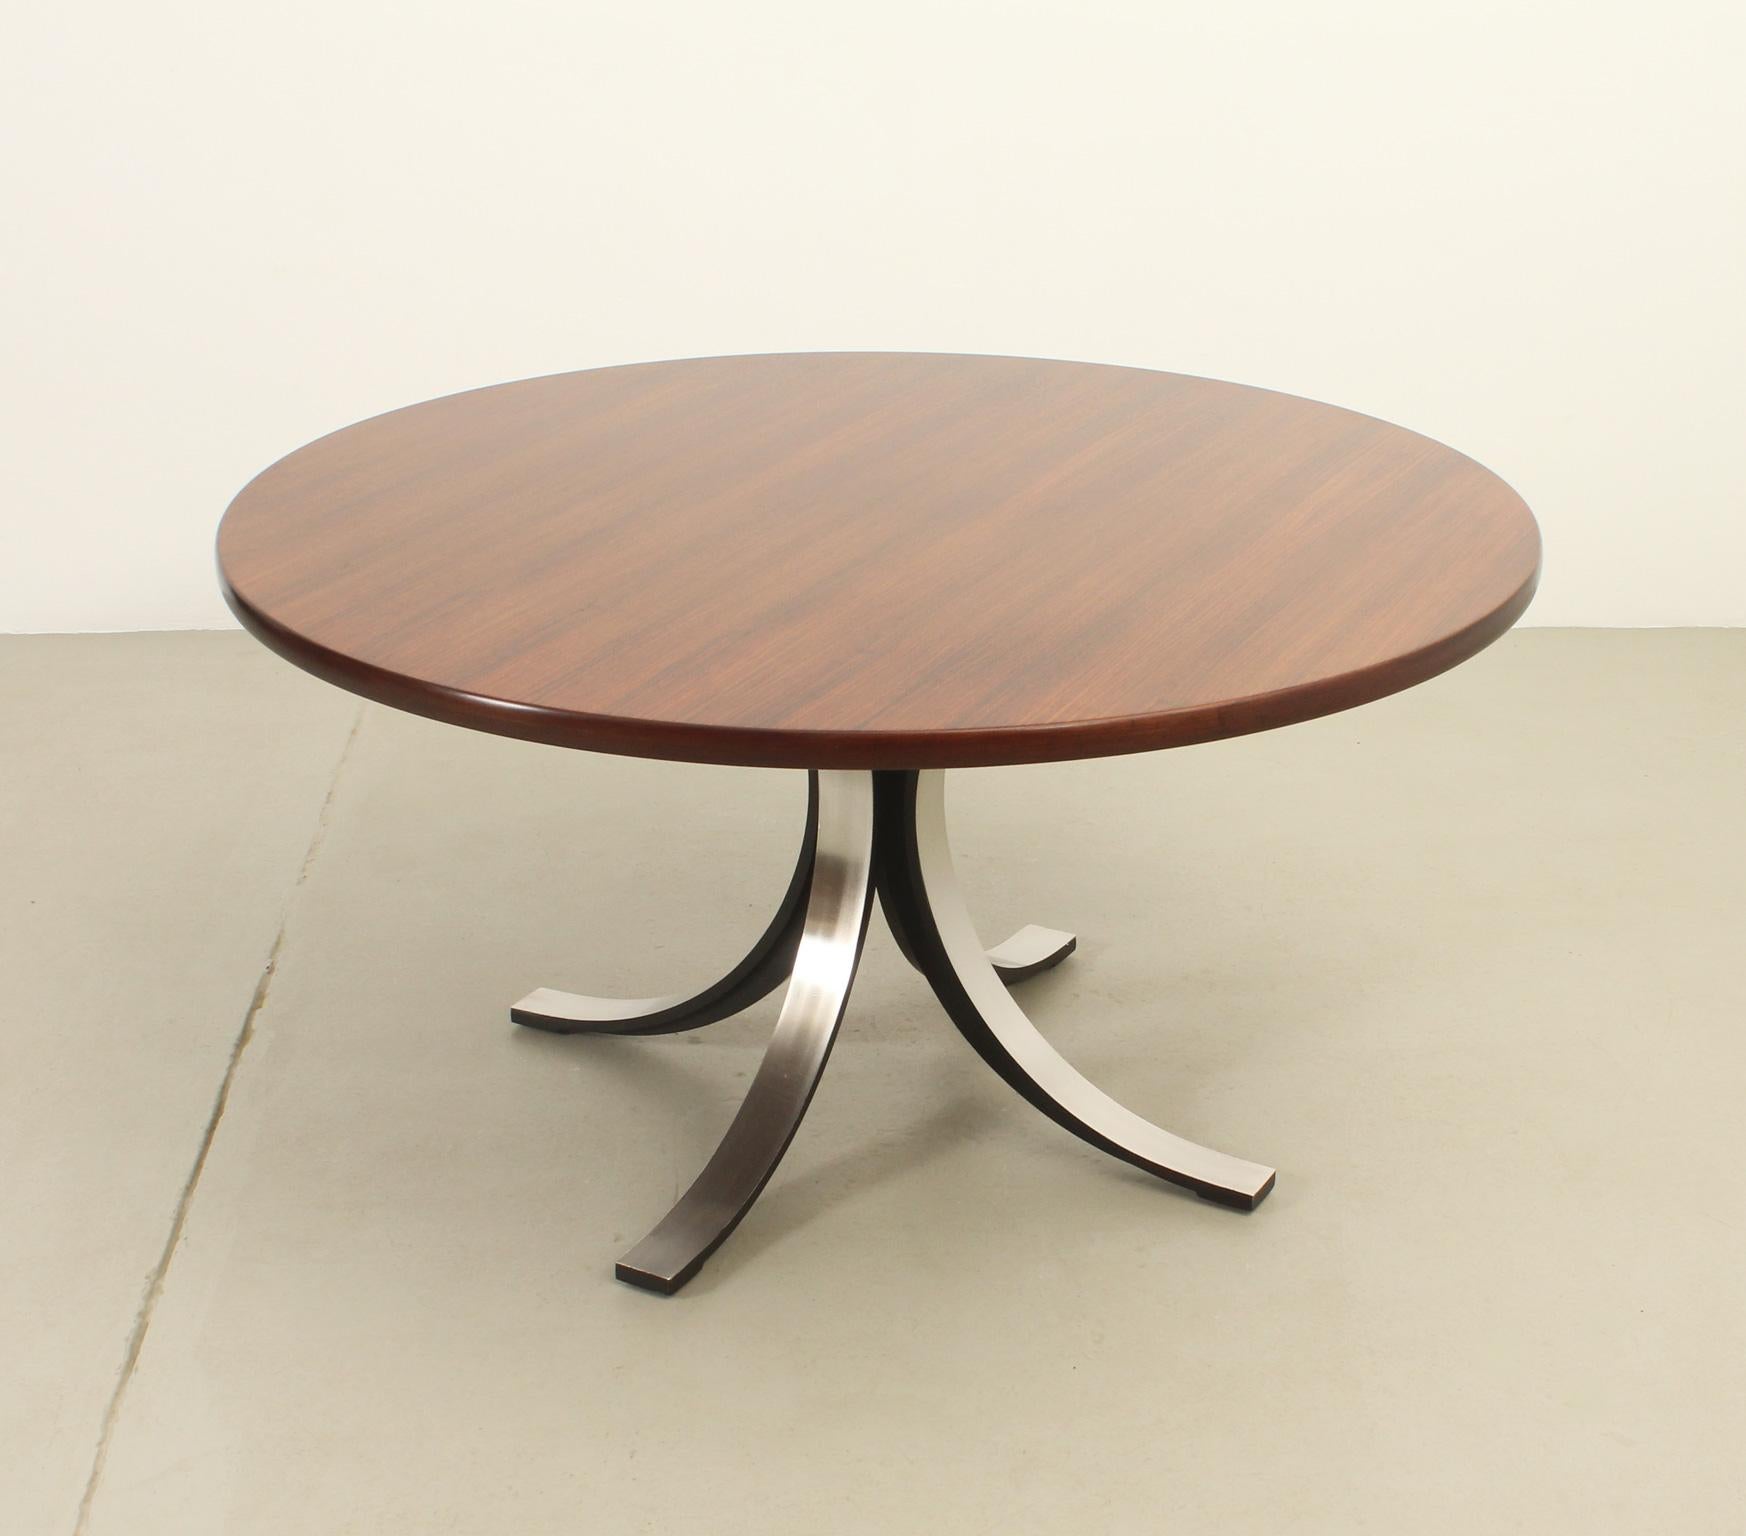 T69 table designed in 1963 by Osvaldo Borsani and Eugenio Gerli for Tecno, Italy. Lacquered aluminium and polished steel base with teak wood top. 